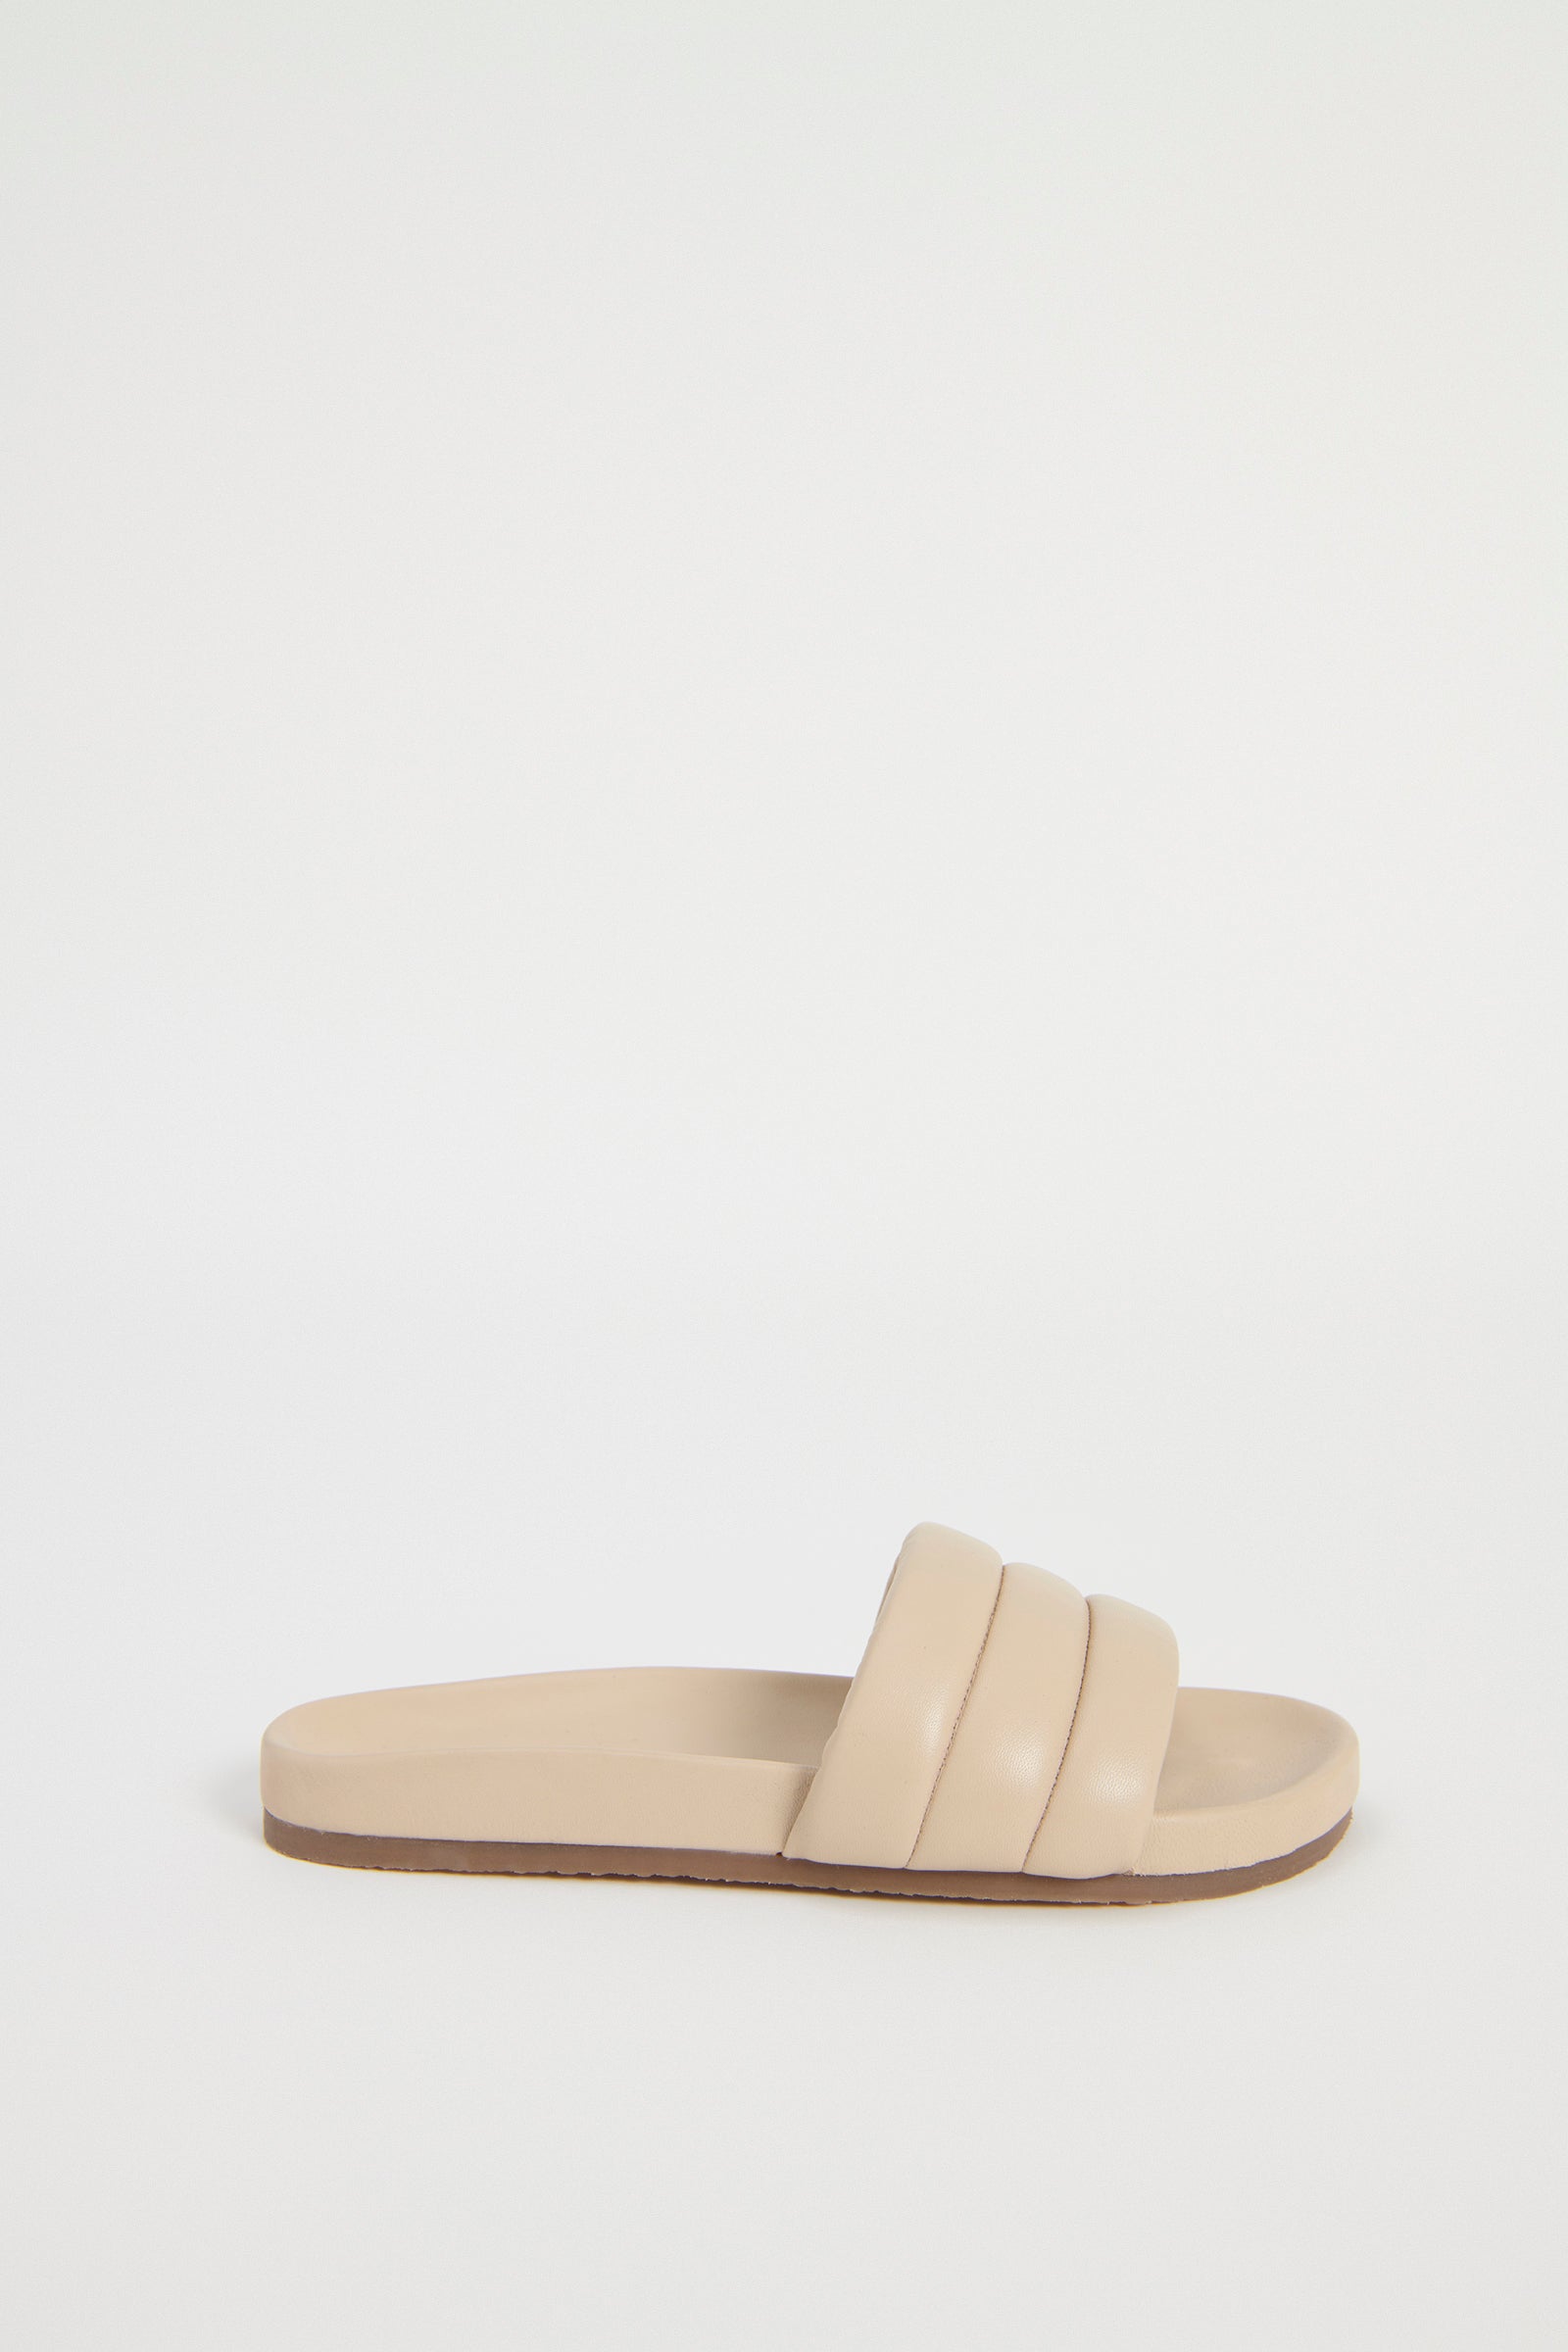 Nude Lucy Classic Leather Slide in Bone